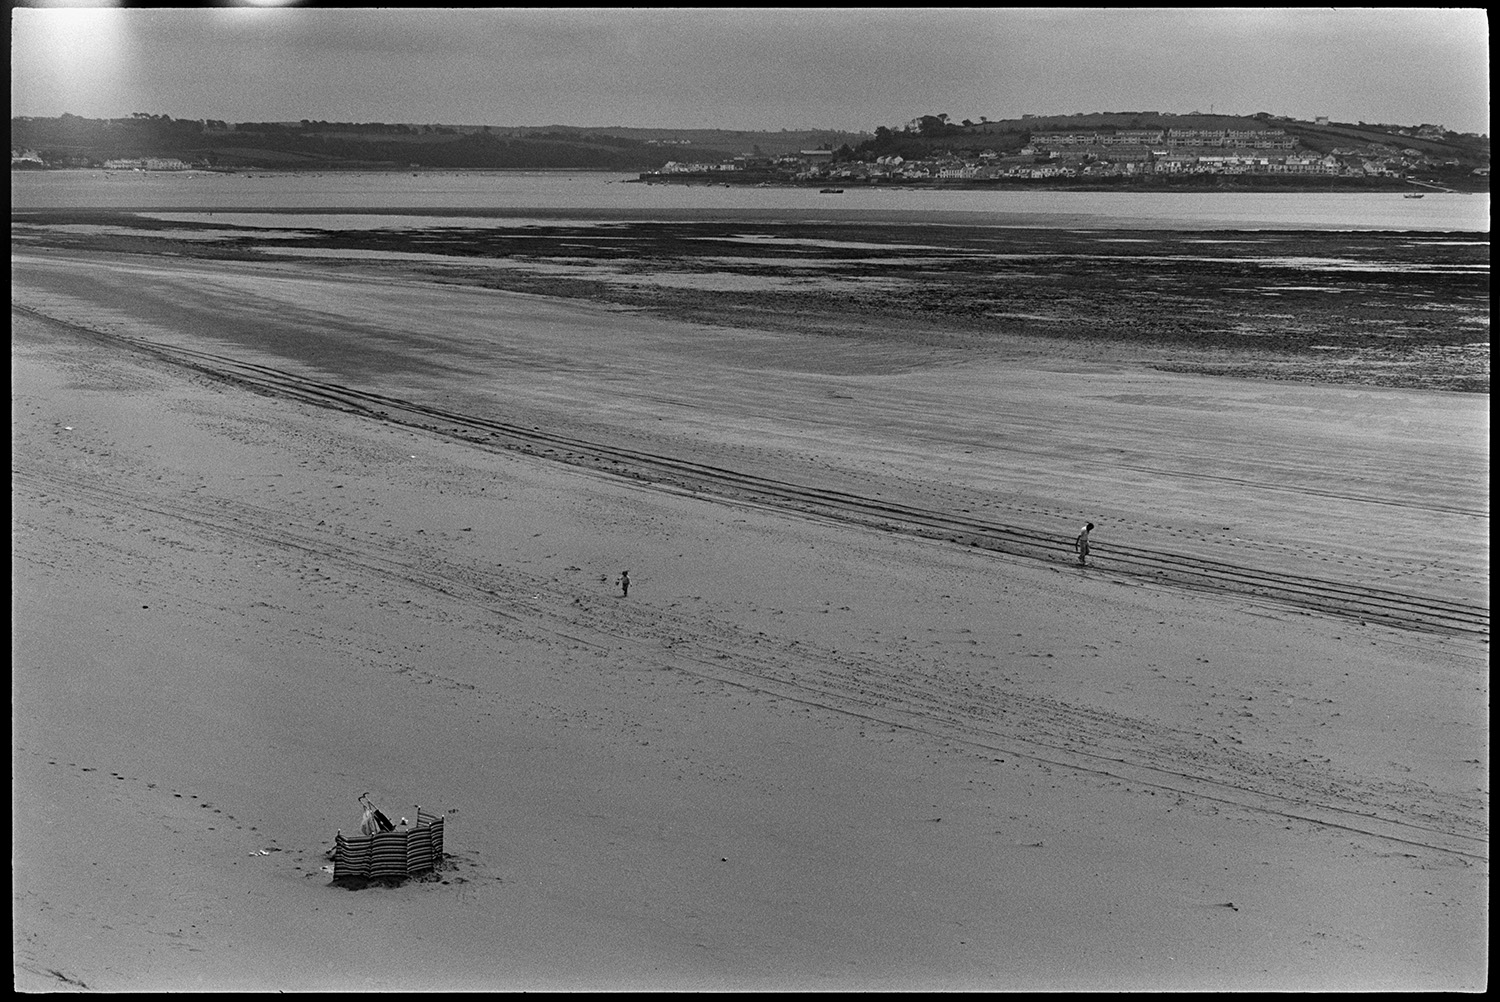 View across estuary with beach and distant power station. 
[People on the beach at Braunton Burrows. A windbreak is also visible with a pram in the foreground. Instow (?) can be seen across the estuary.]